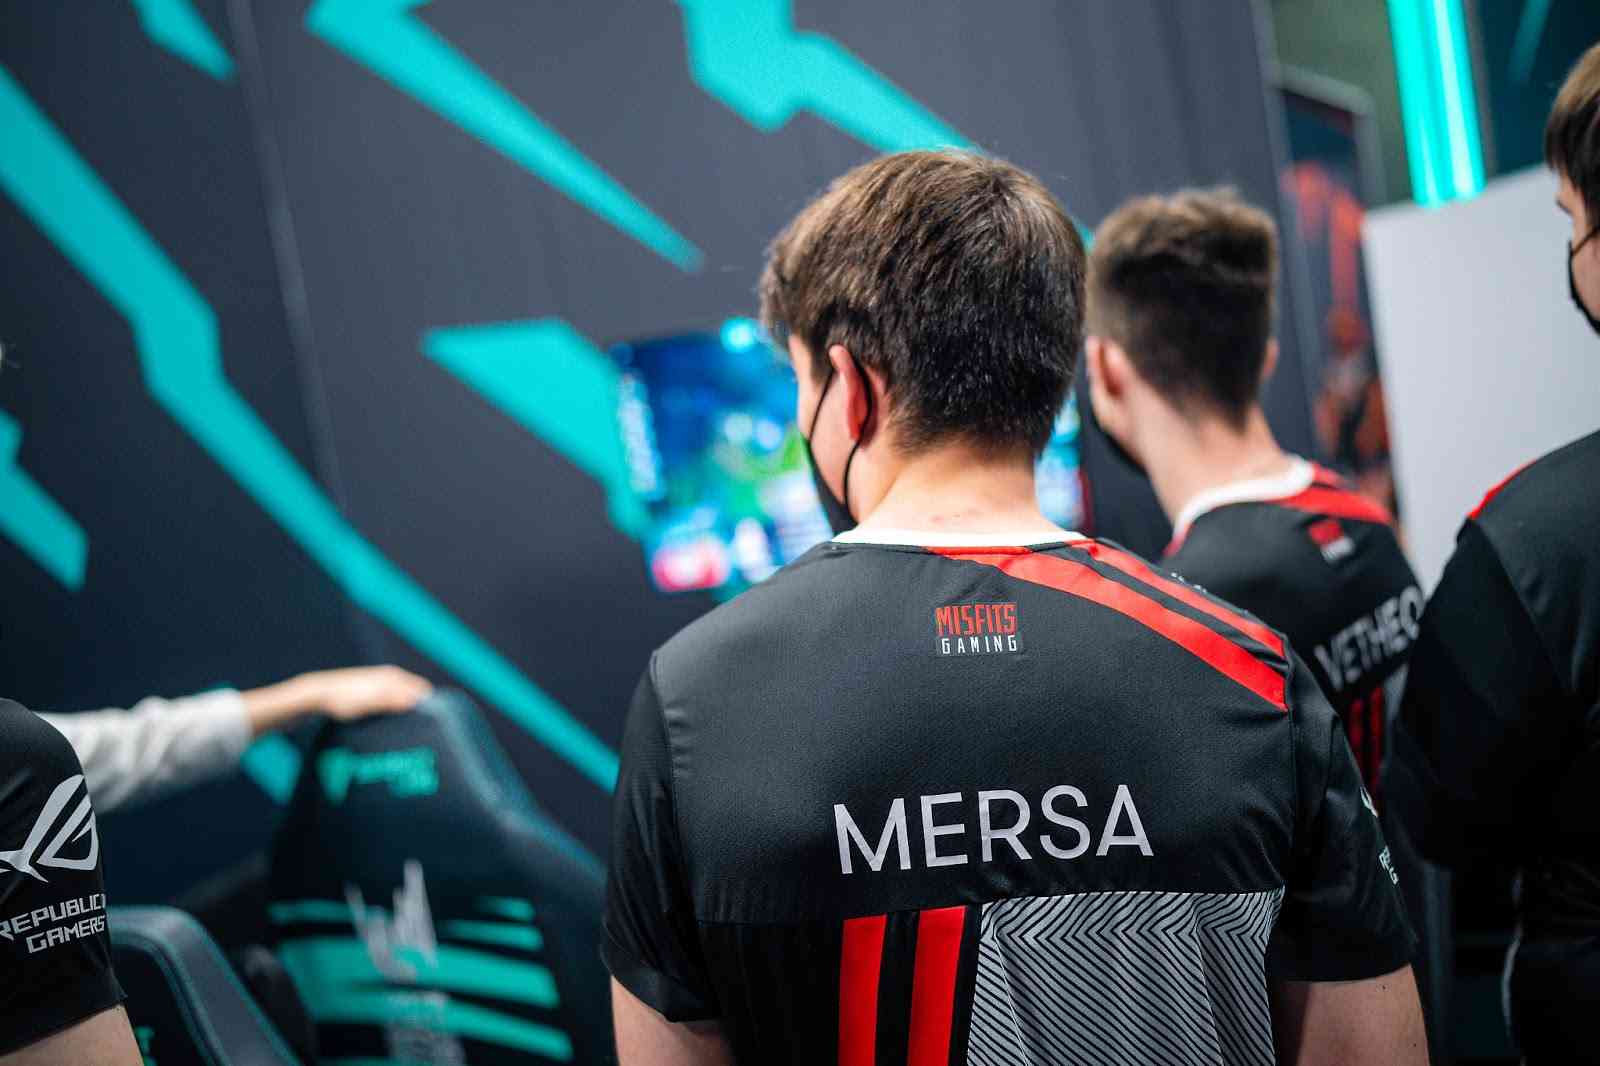 MSF Mersa walks on stage to play at the LEC, the back of his jersey with his name and the Misfits logo visible